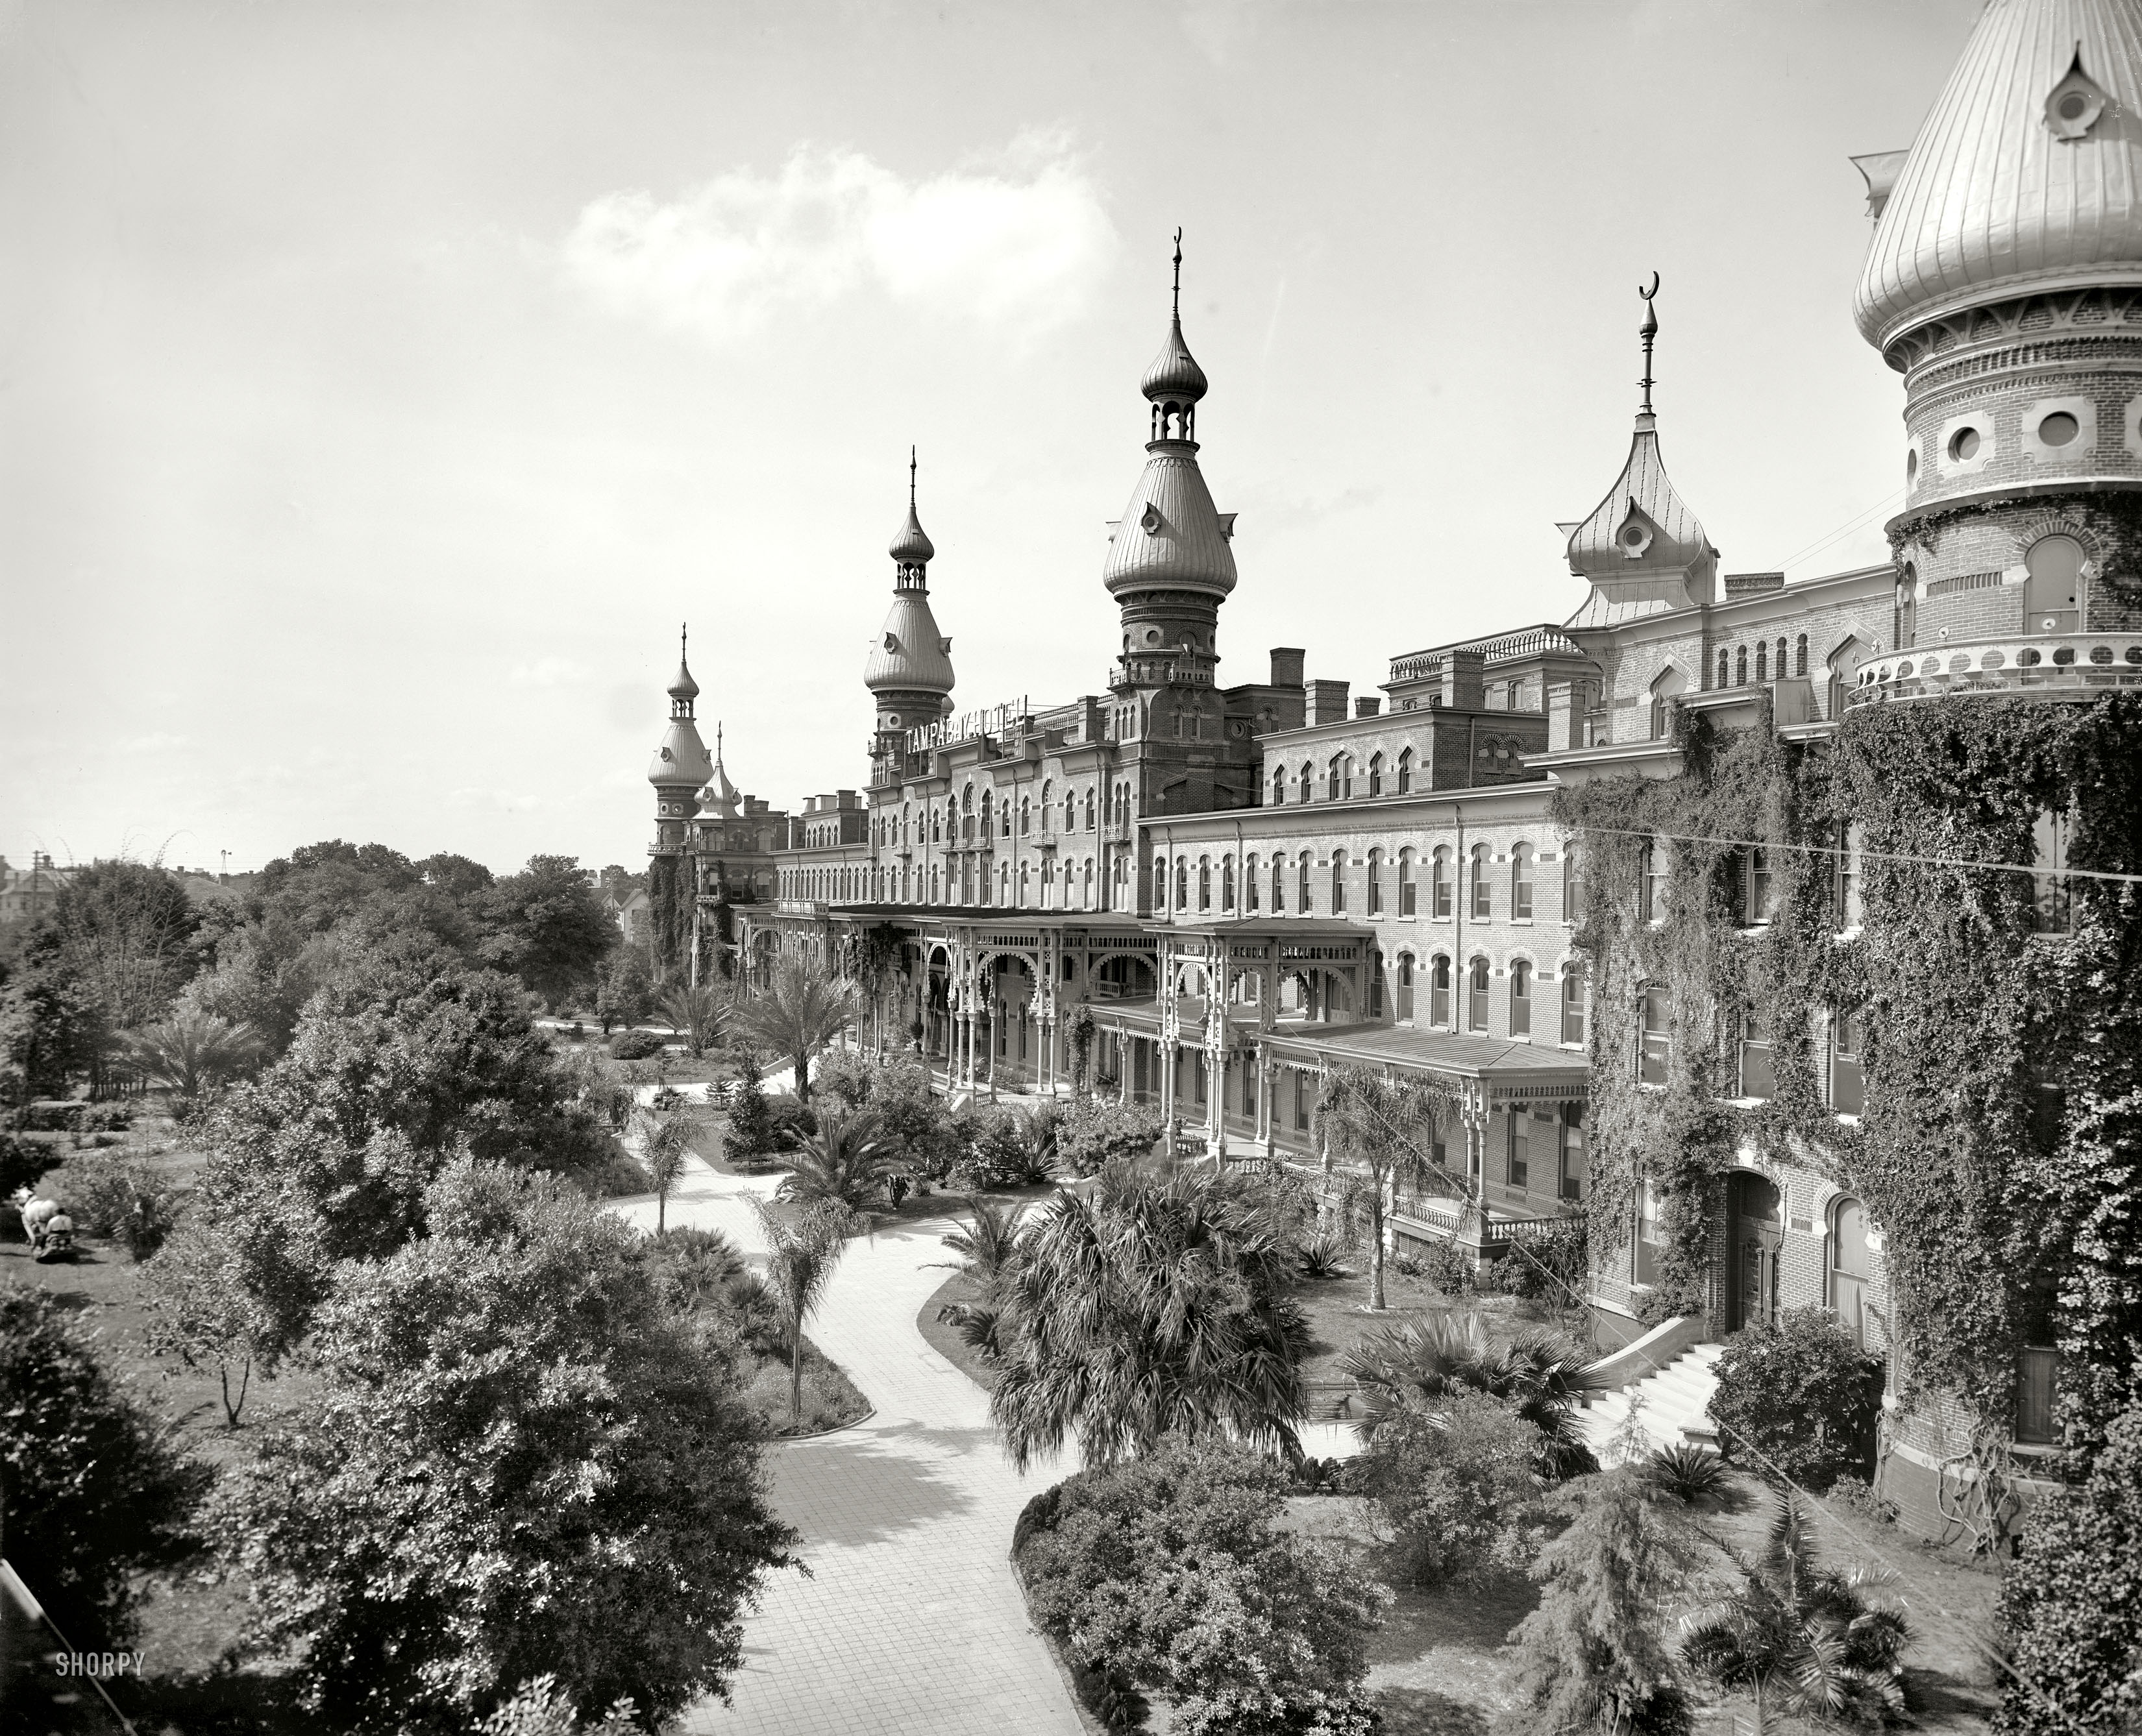 "Tampa Bay Hotel, Florida, 1902." 8x10 inch dry plate glass negative by William Henry Jackson, Detroit Publishing Company. View full size.